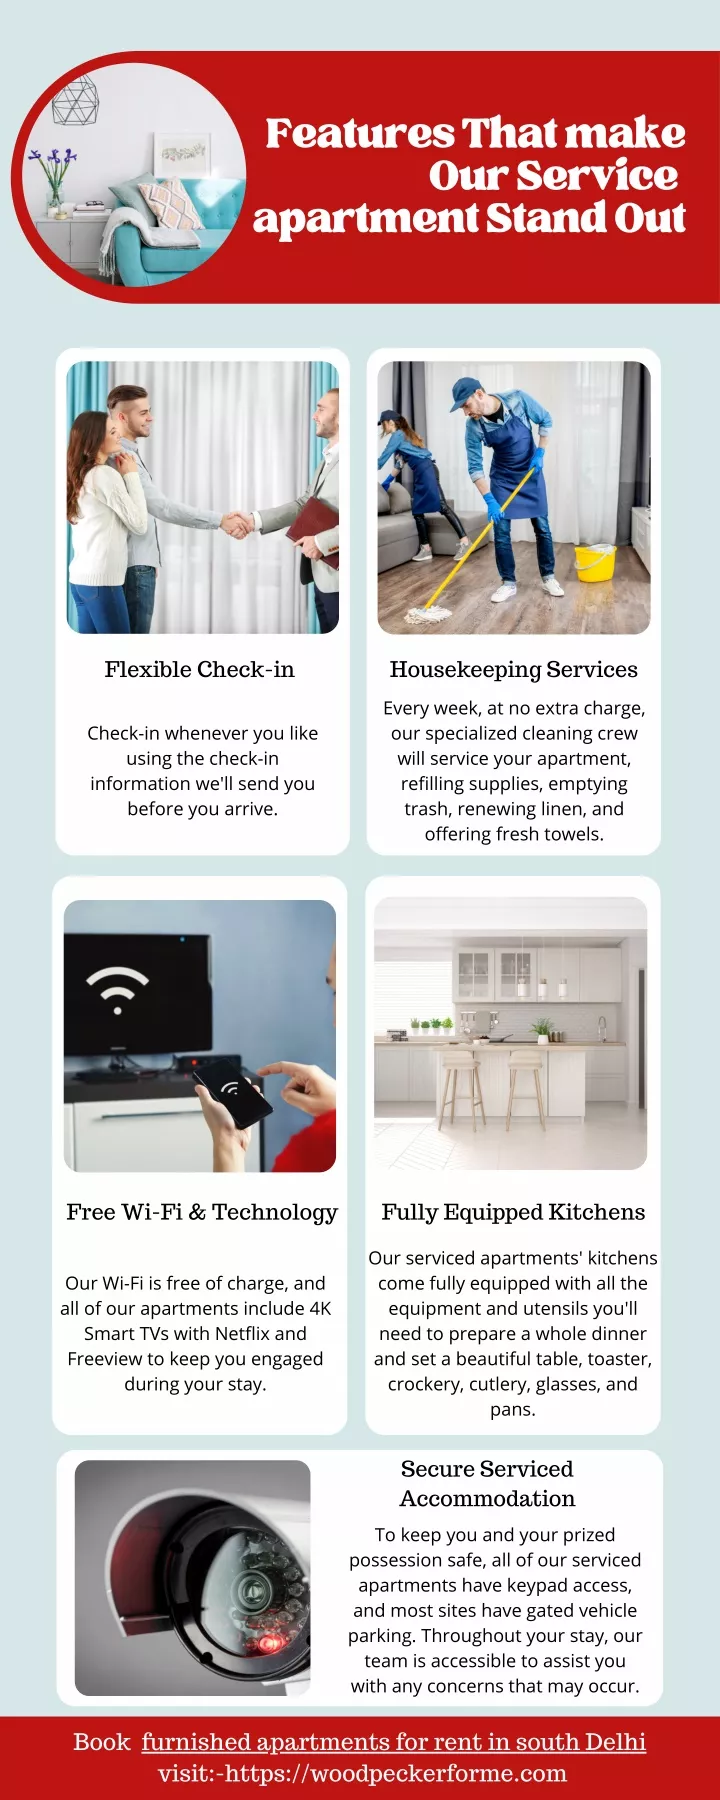 features that make our service apartment stand out